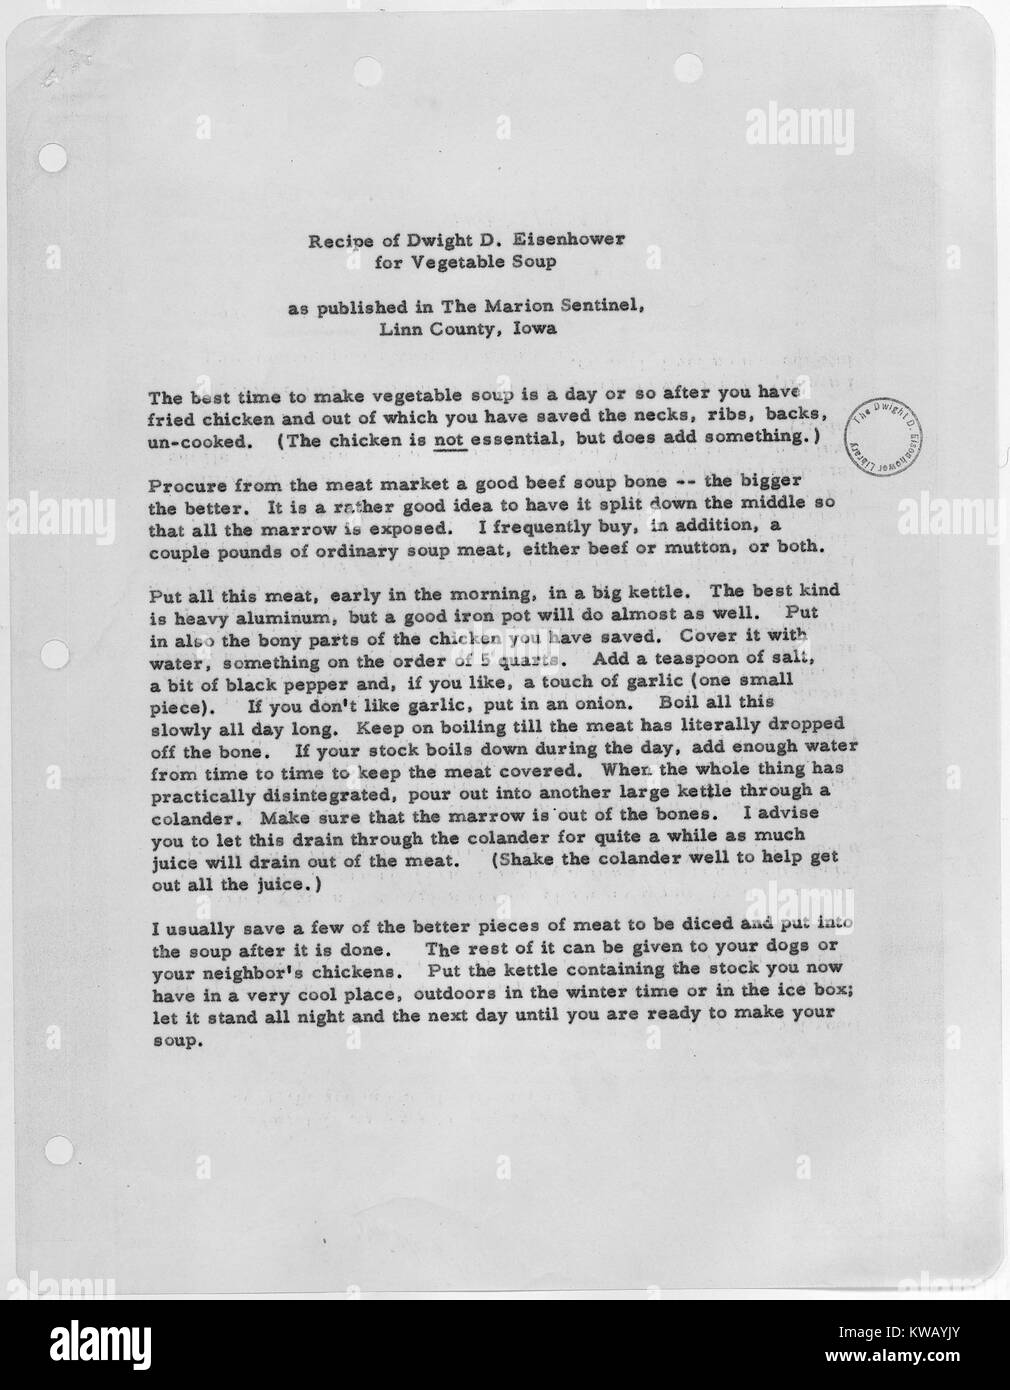 President Eisenhower's recipe for vegetable soup as published in The Marion Sentinel, 1953. Stock Photo